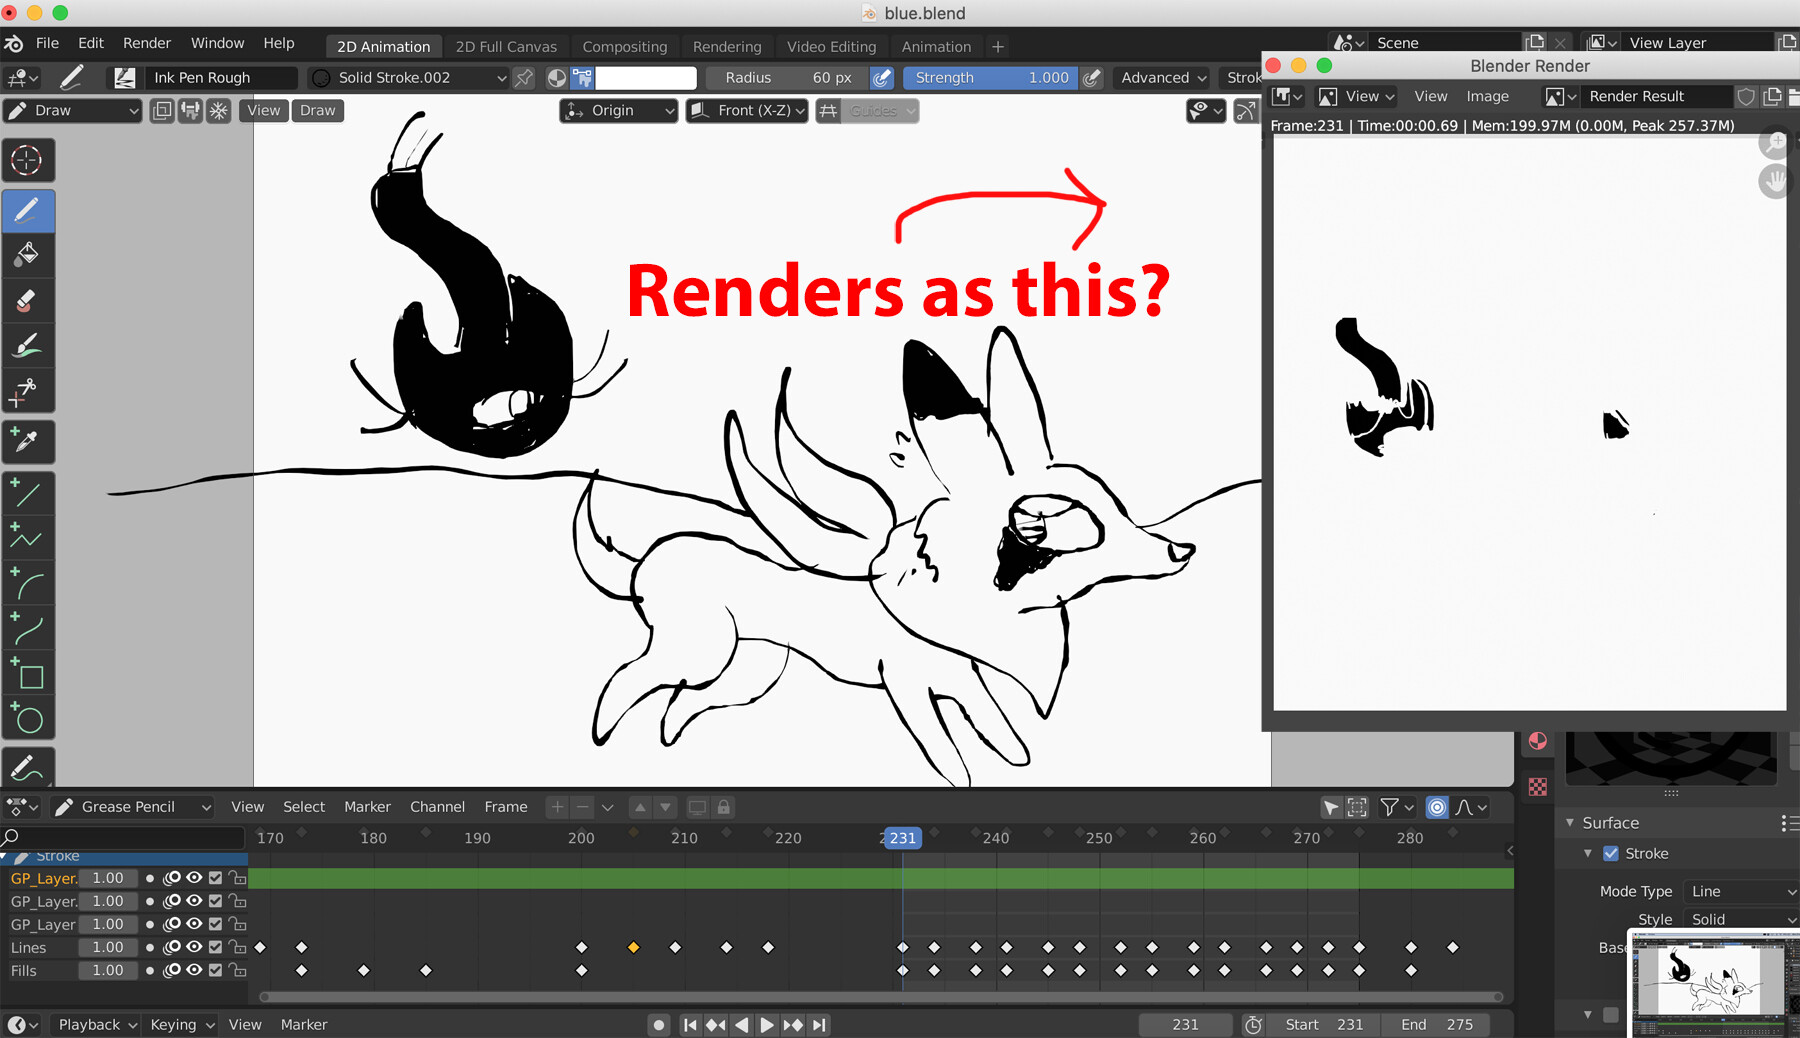 Blender's Grease Pencil won't draw smooth strokes - Technical Support -  Blender Artists Community